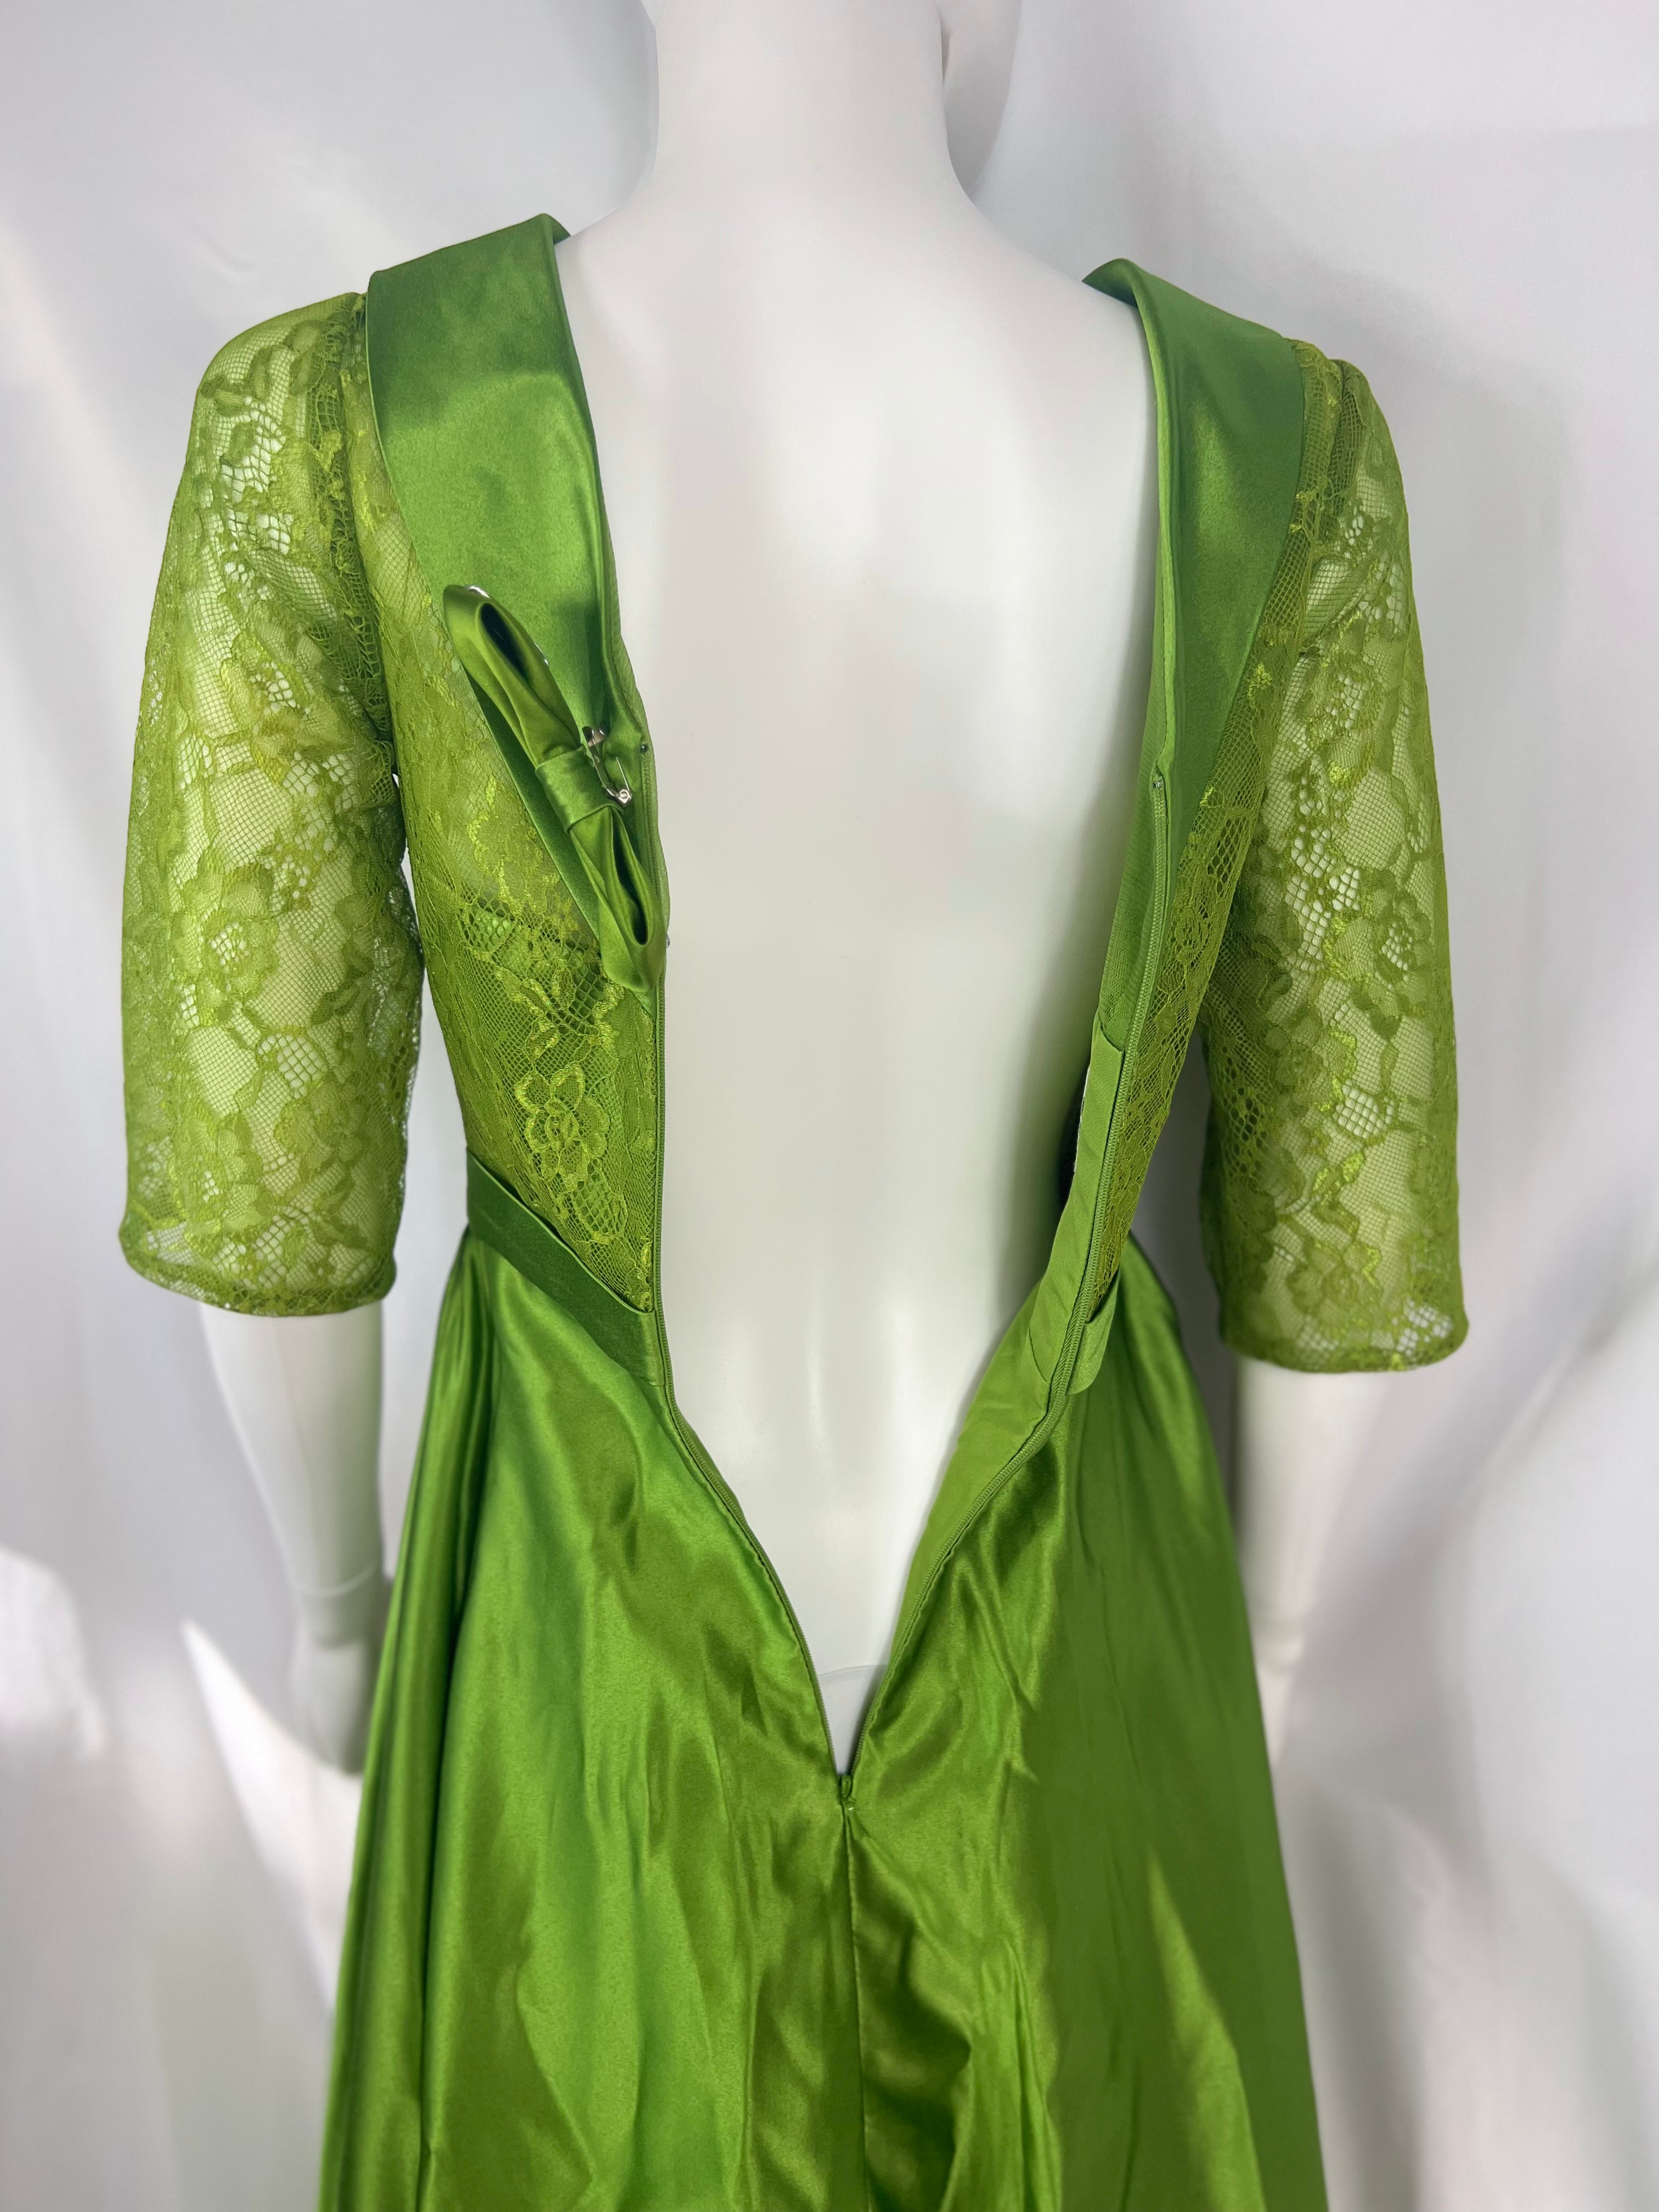 Lime Green Retro 50's Style Dress